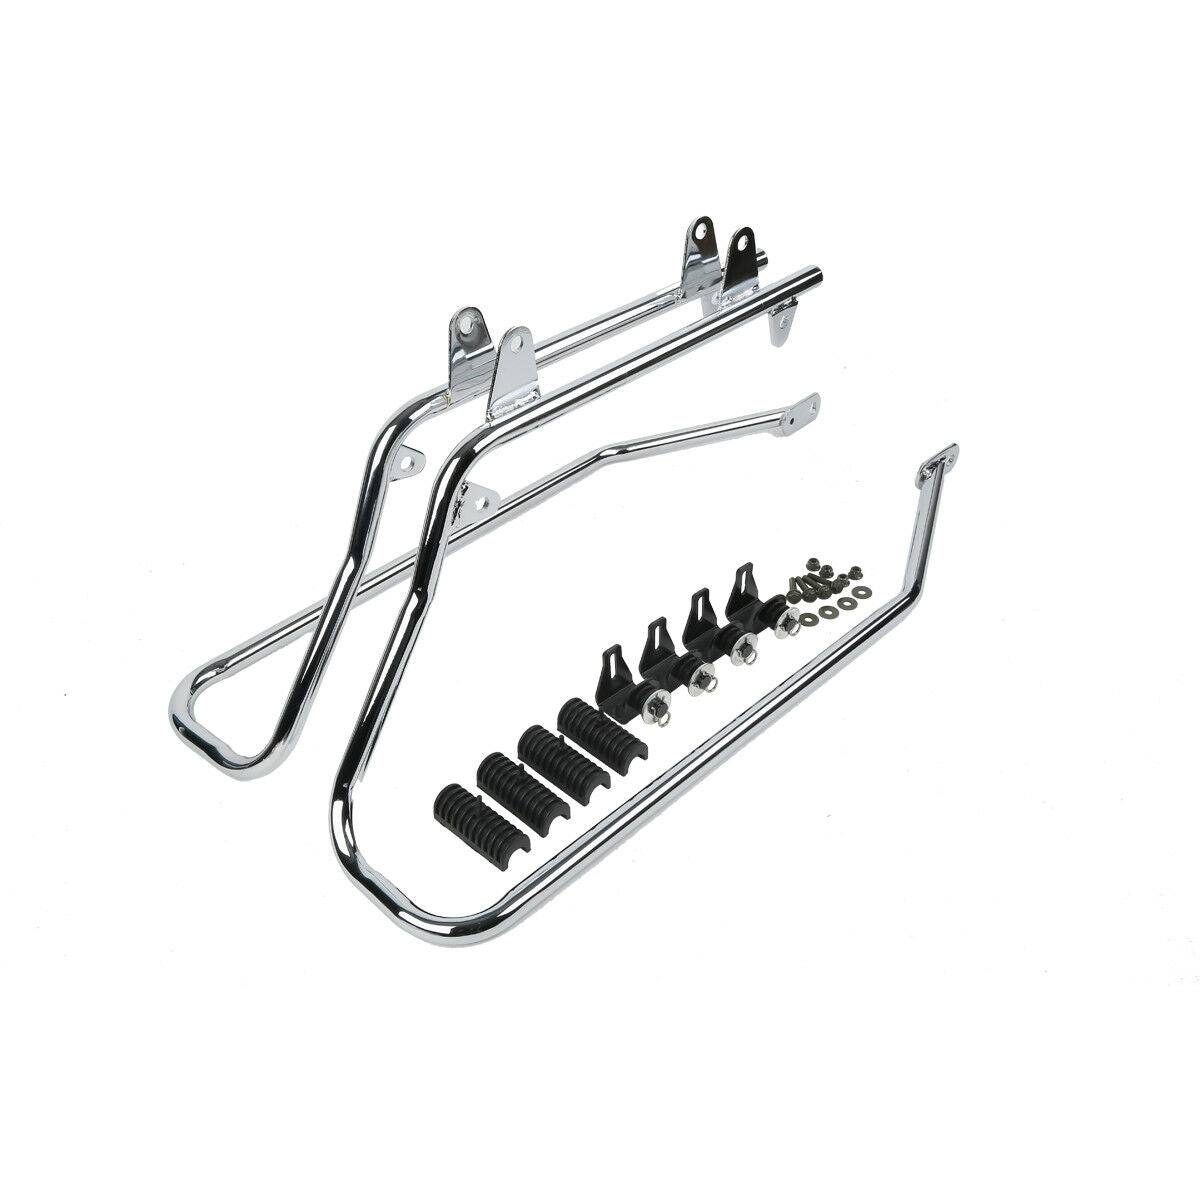 Saddlebags Conversion Brackets Fit For Harley Davidson Softail 1984-2017 2016 US - Moto Life Products